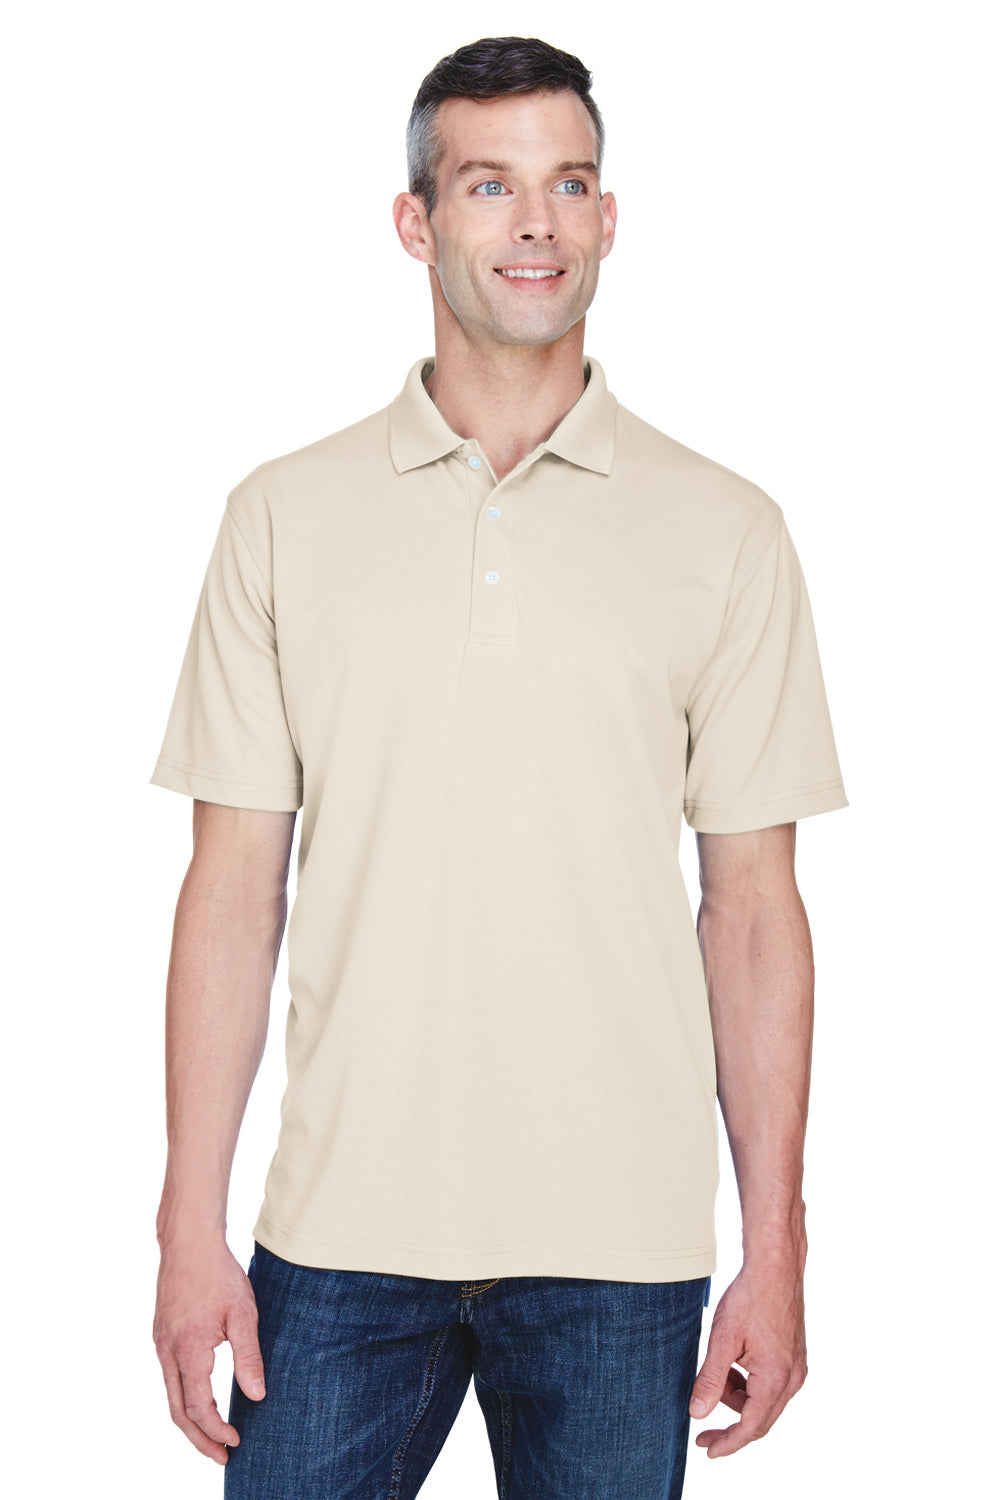 UltraClub 8445 Mens Cool & Dry Performance Moisture Wicking Short Sleeve Polo Shirt Stone Brown Front